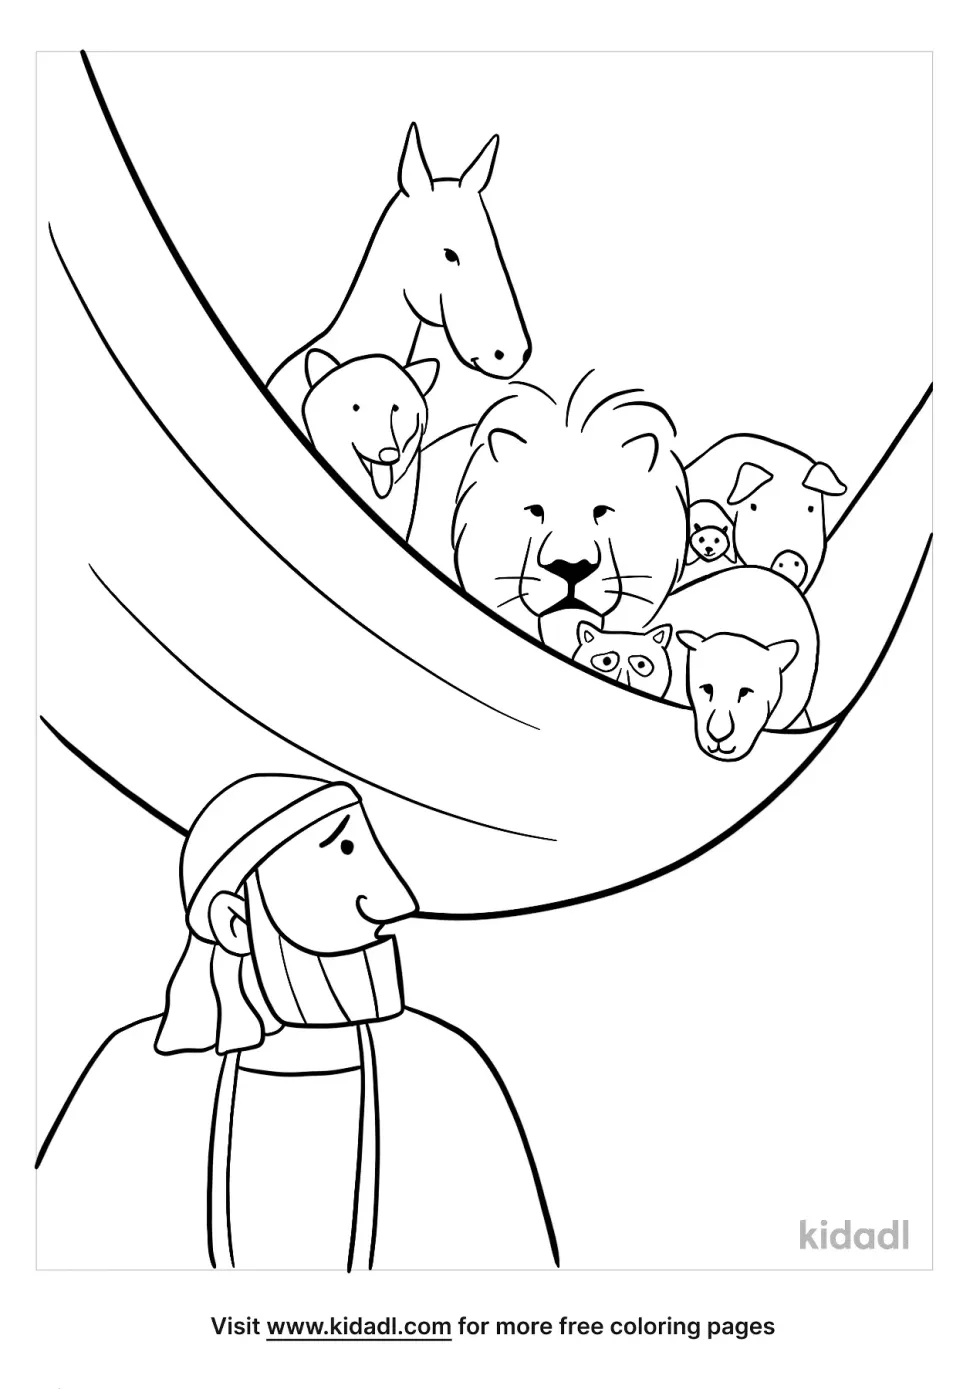 Peter's Vision Coloring Page